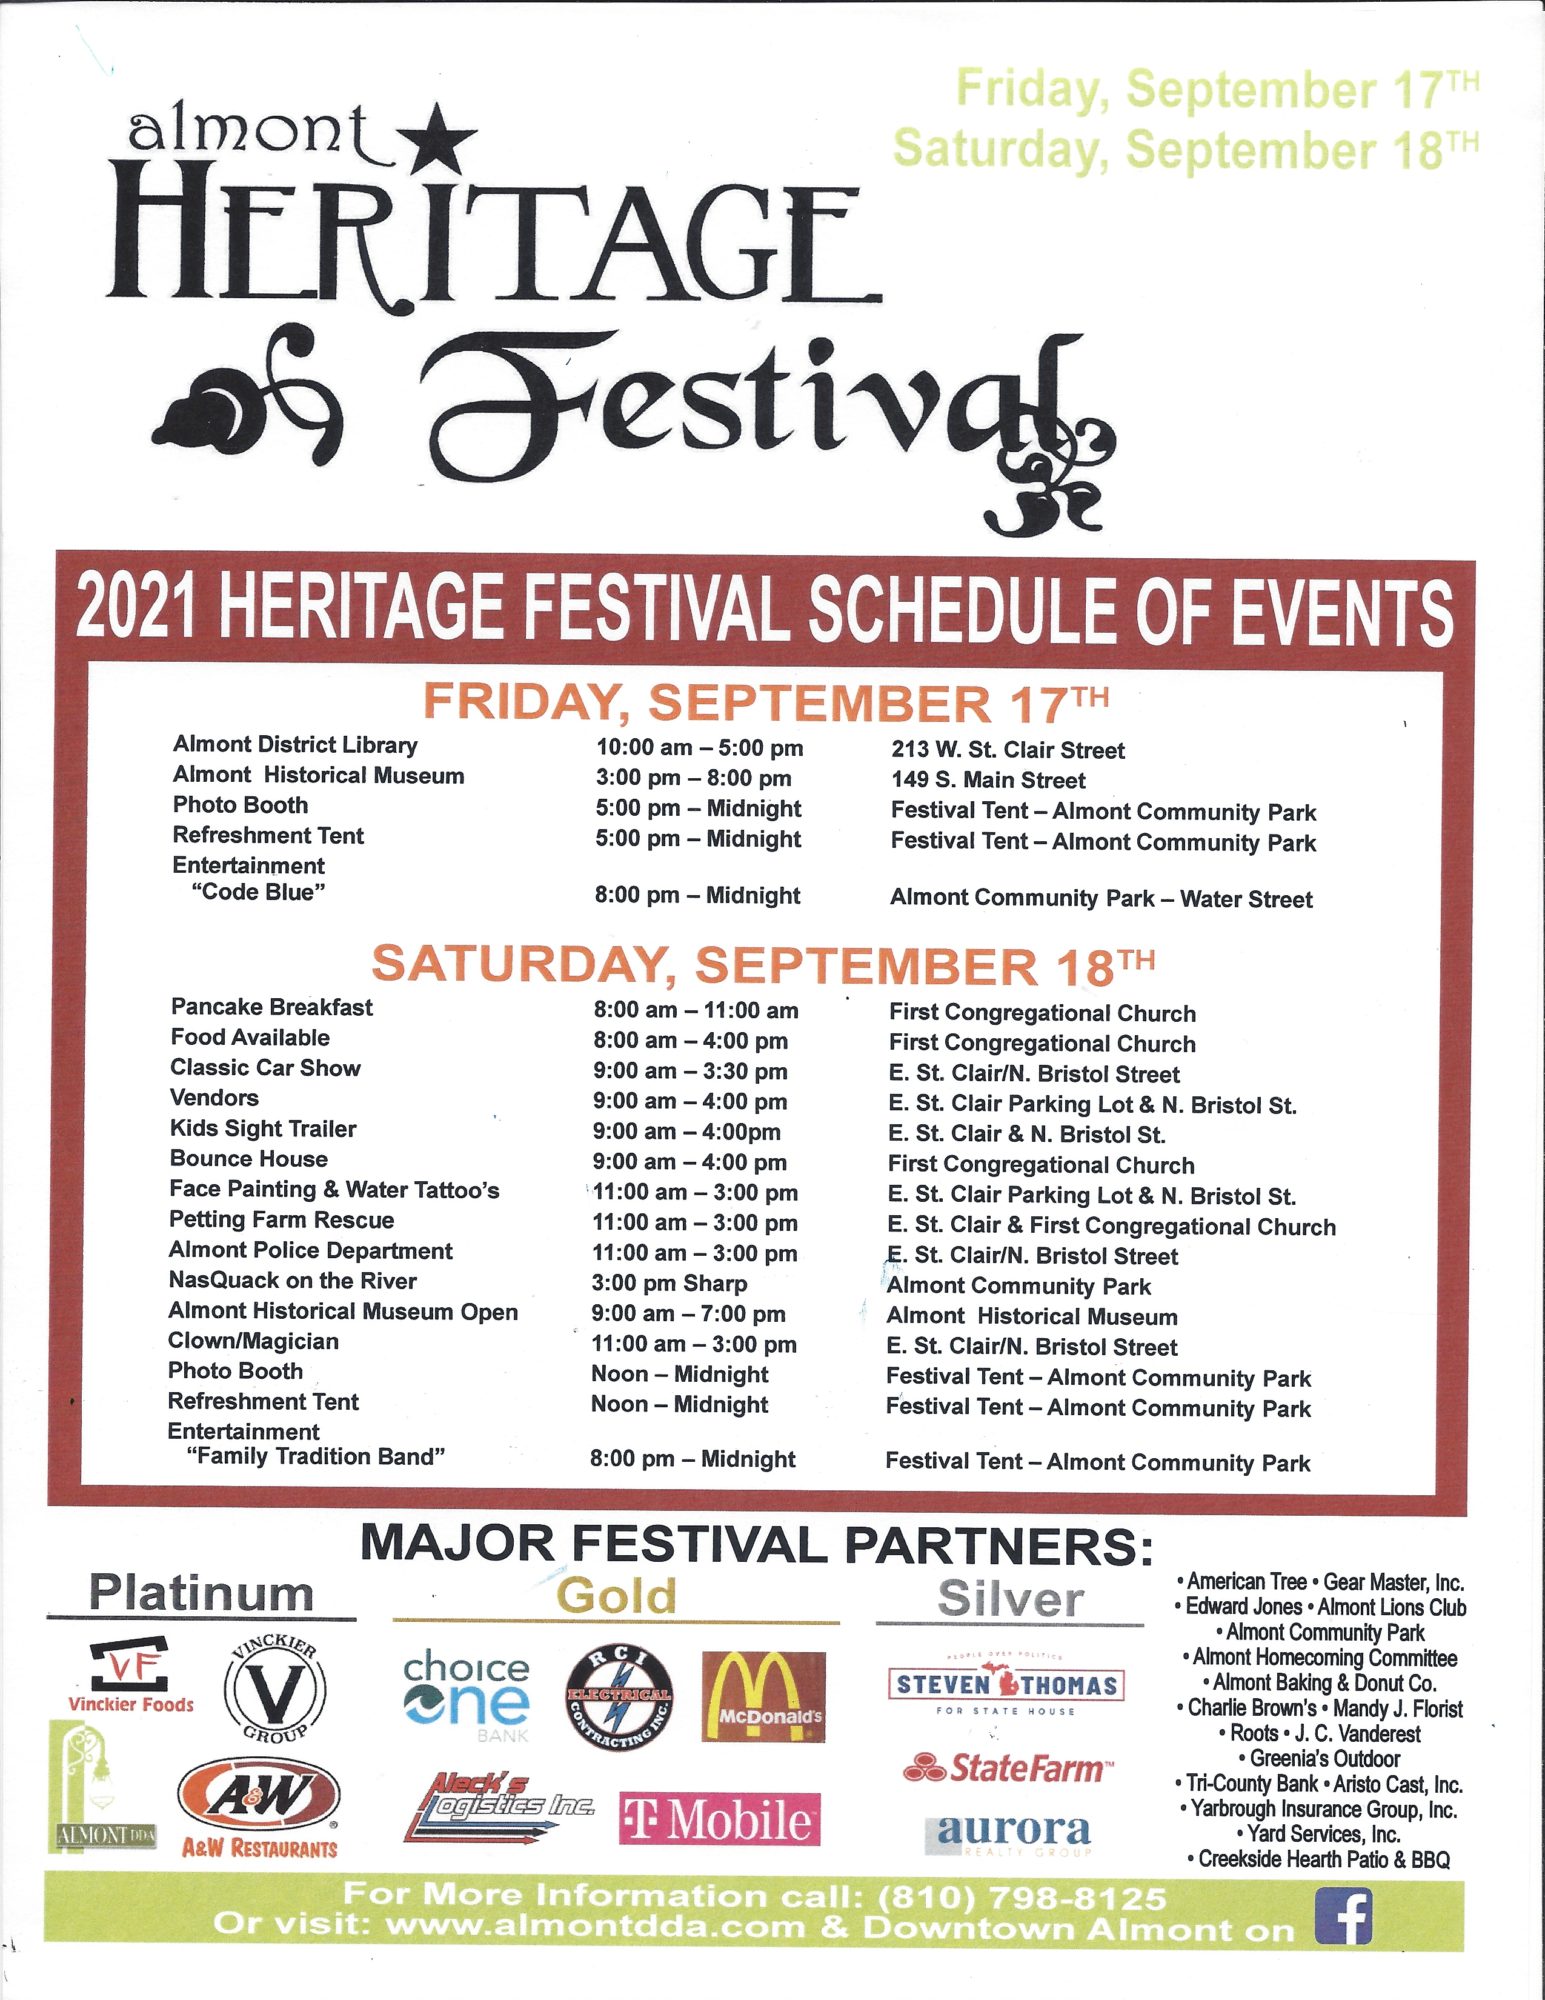 heritage festival schedule of events